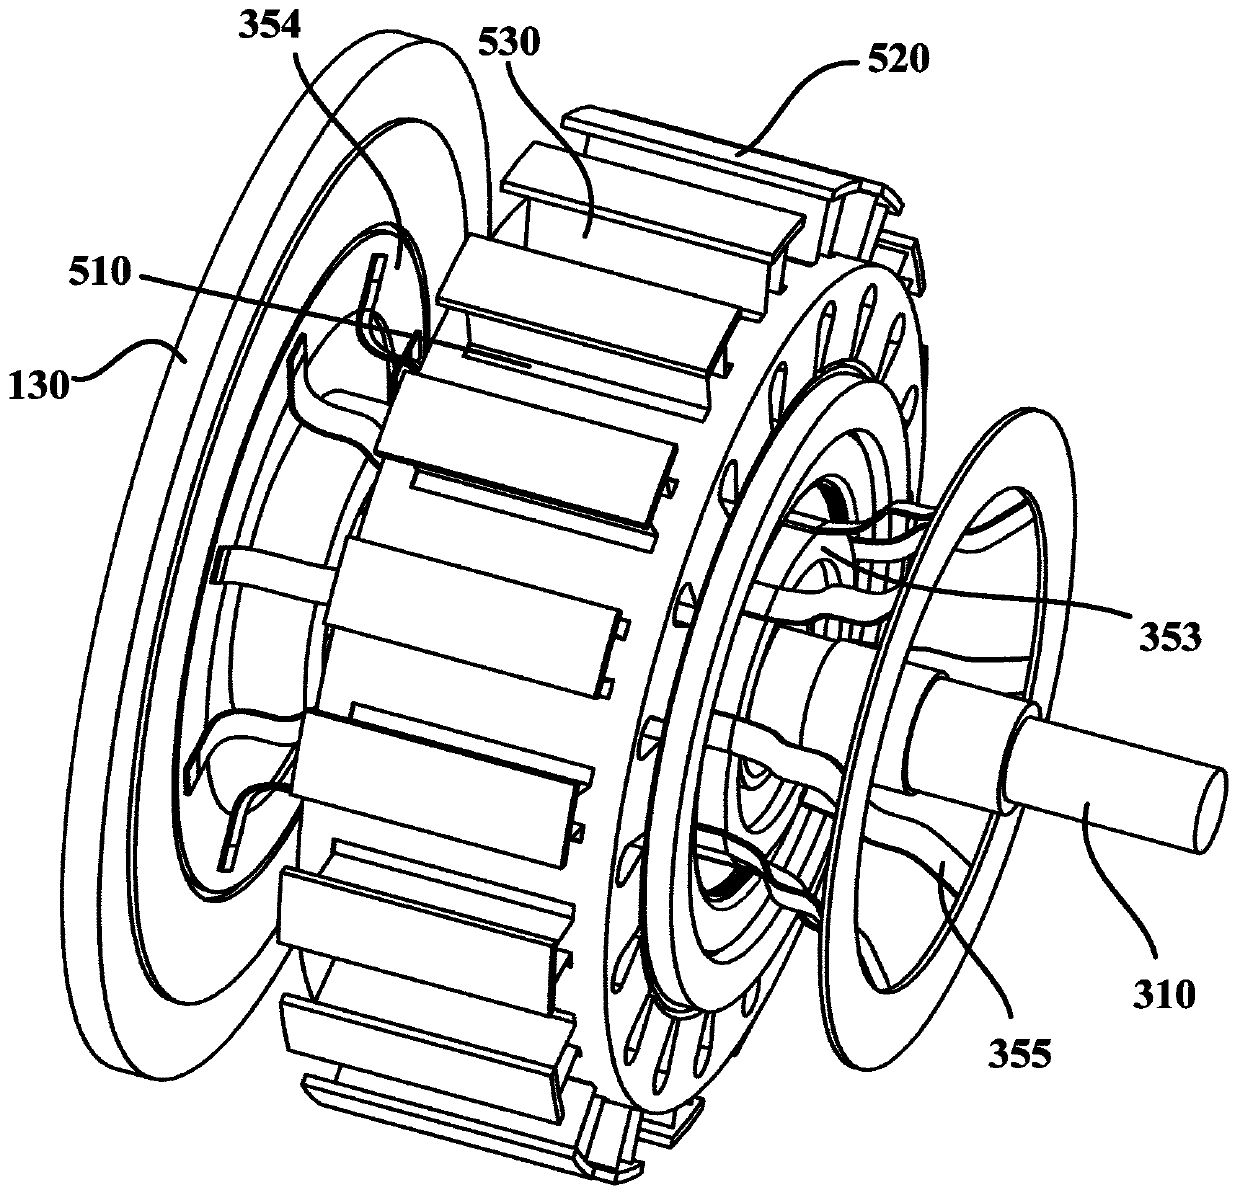 Motor and its control method